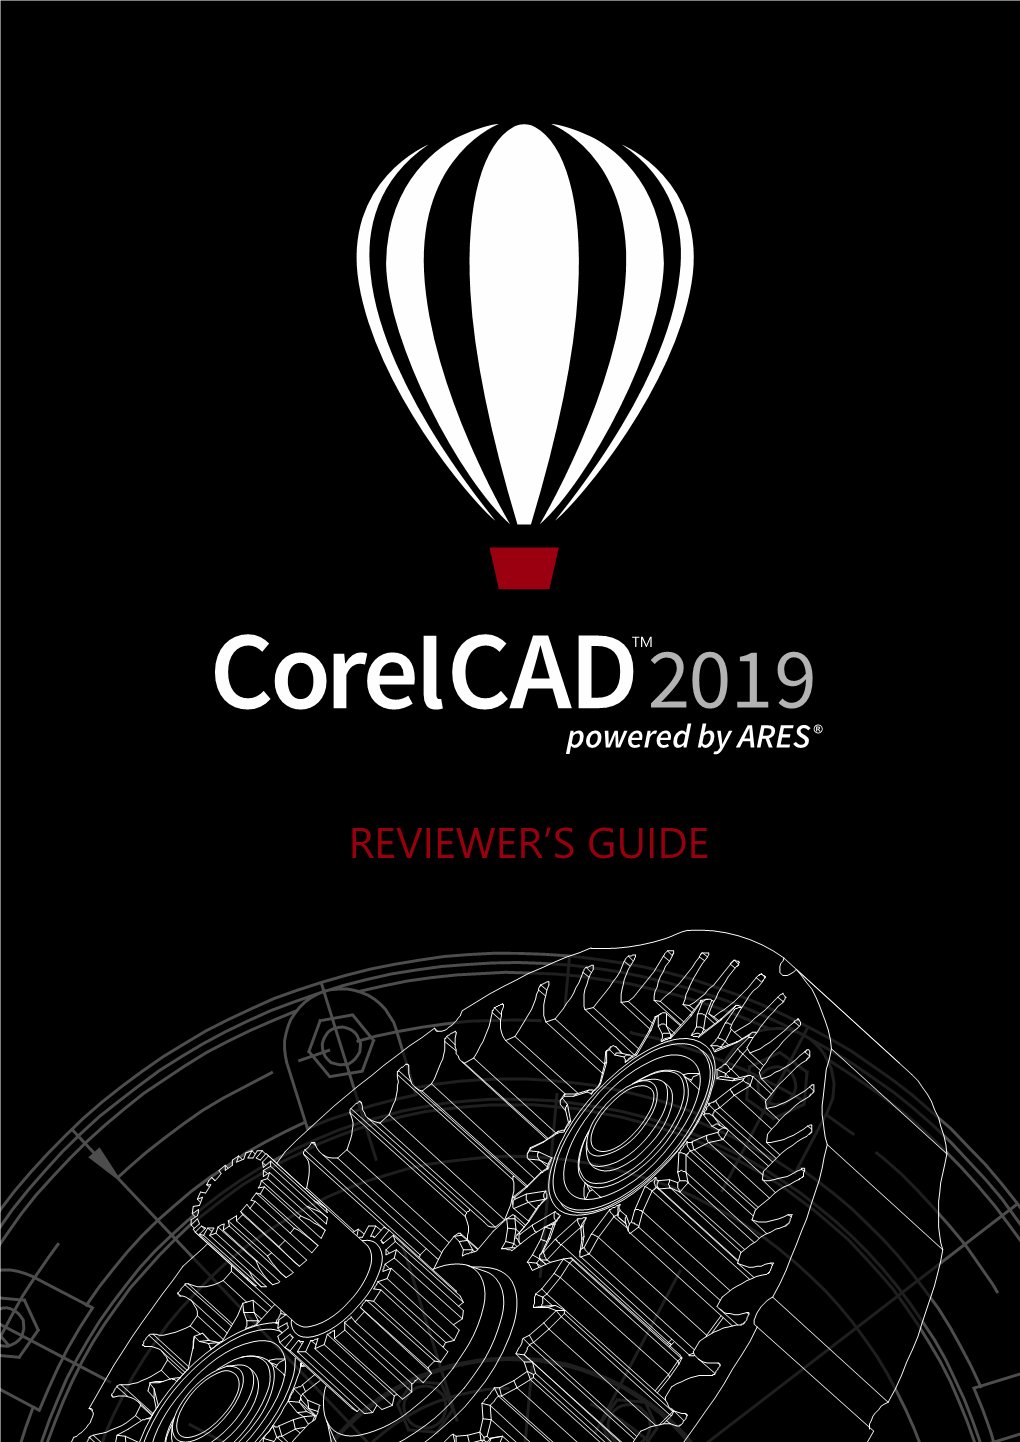 Corelcad 2019 Reviewer's Guide